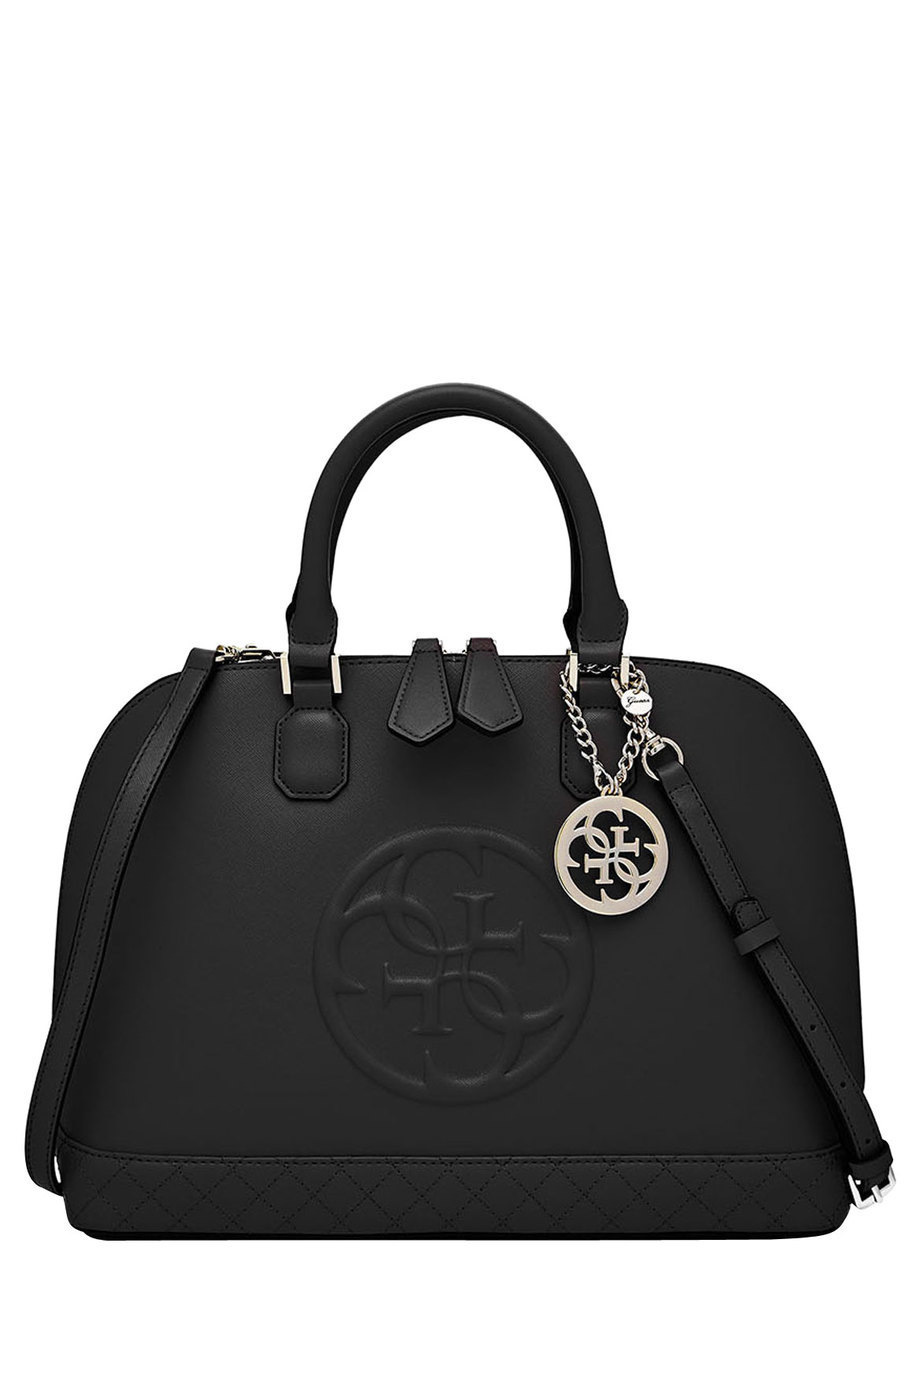 Guess  Korry Dome Satchel  Myer Online